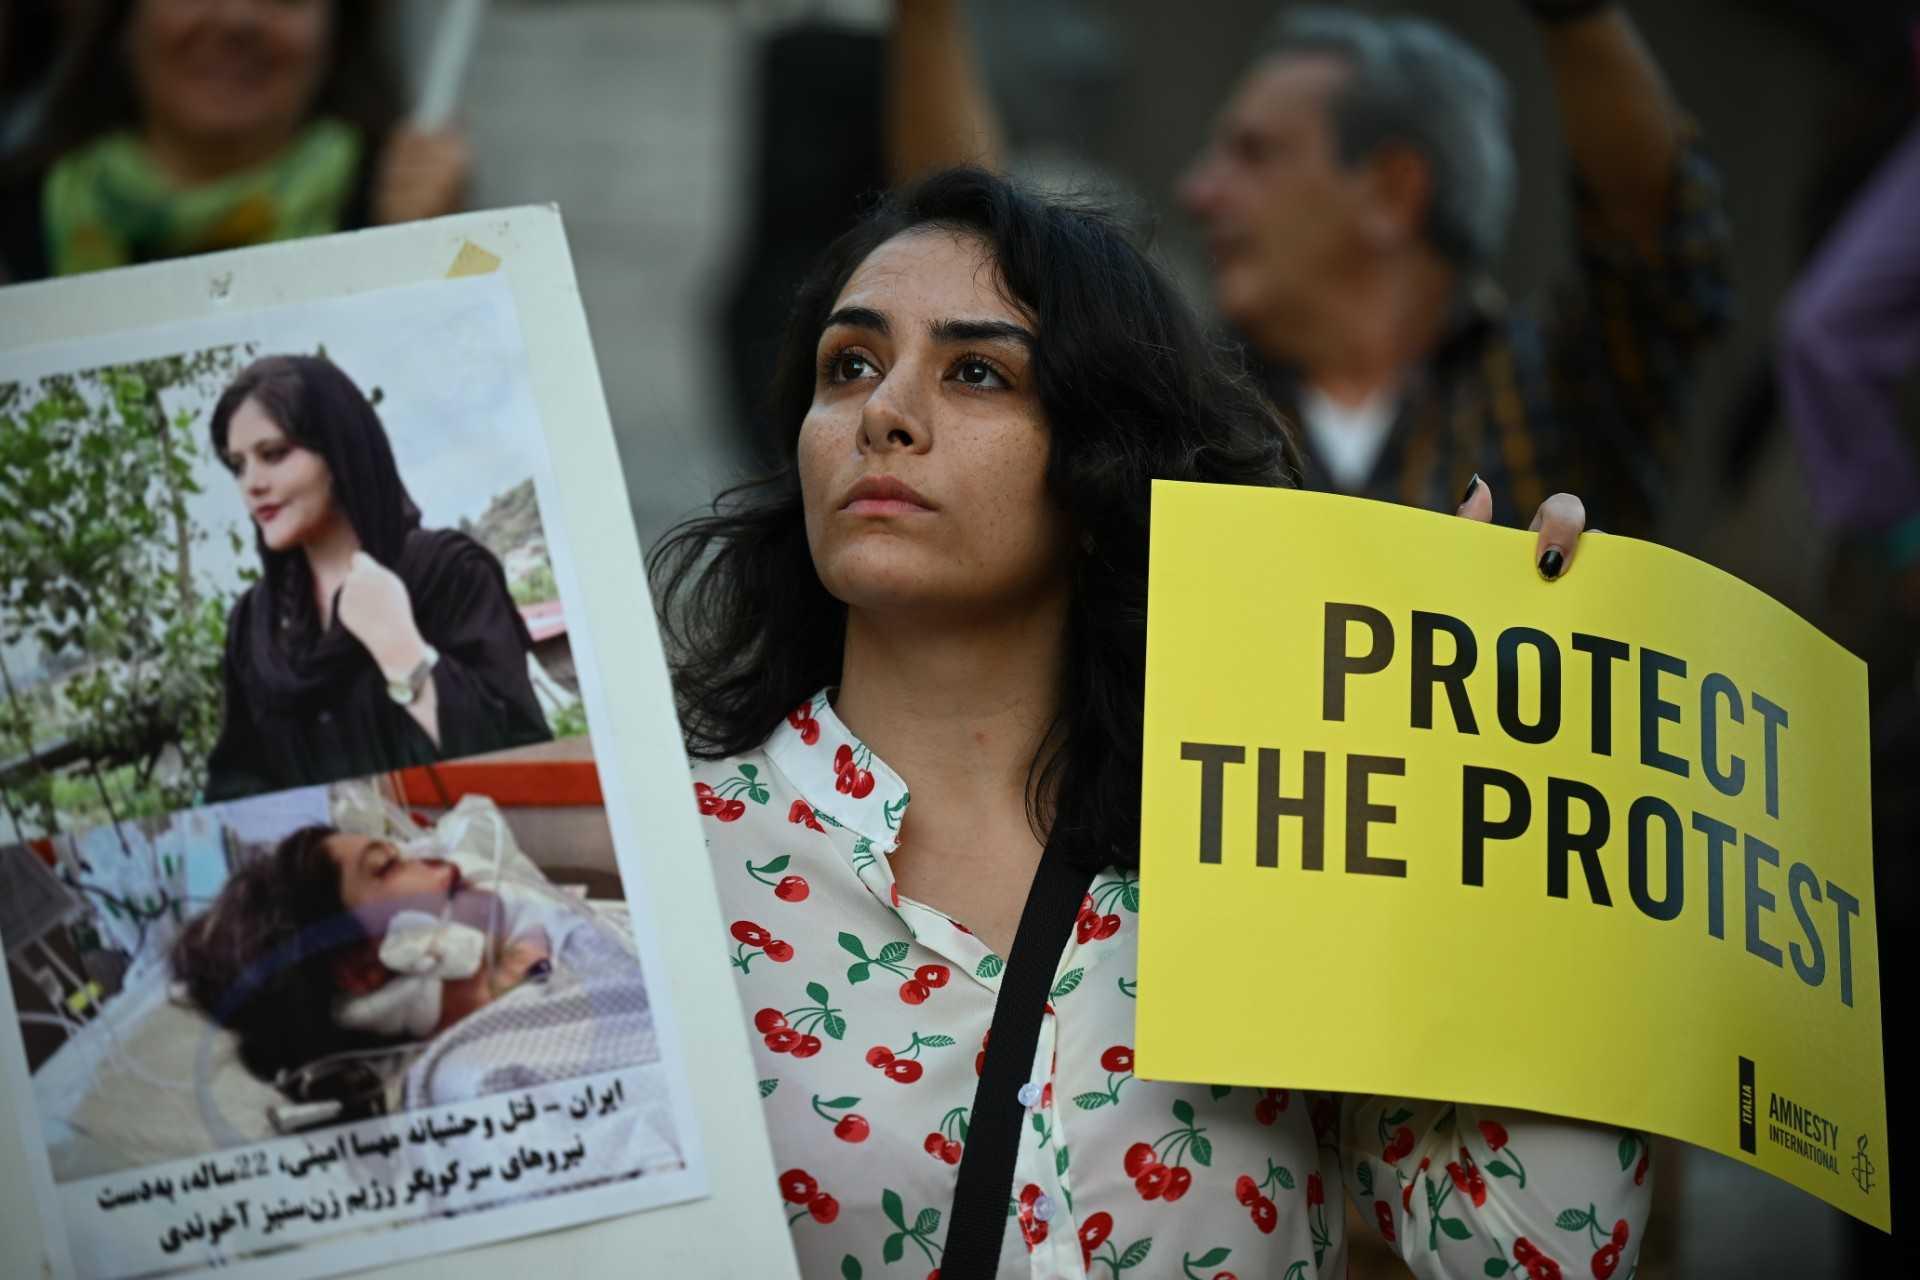 A protester holds pictures of Kurdish Iranian woman Mahsa Amini during a demonstration in Piazza del Campidoglio in Rome on Oct 5, following her death in the custody of morality police in Iran. Photo: AFP